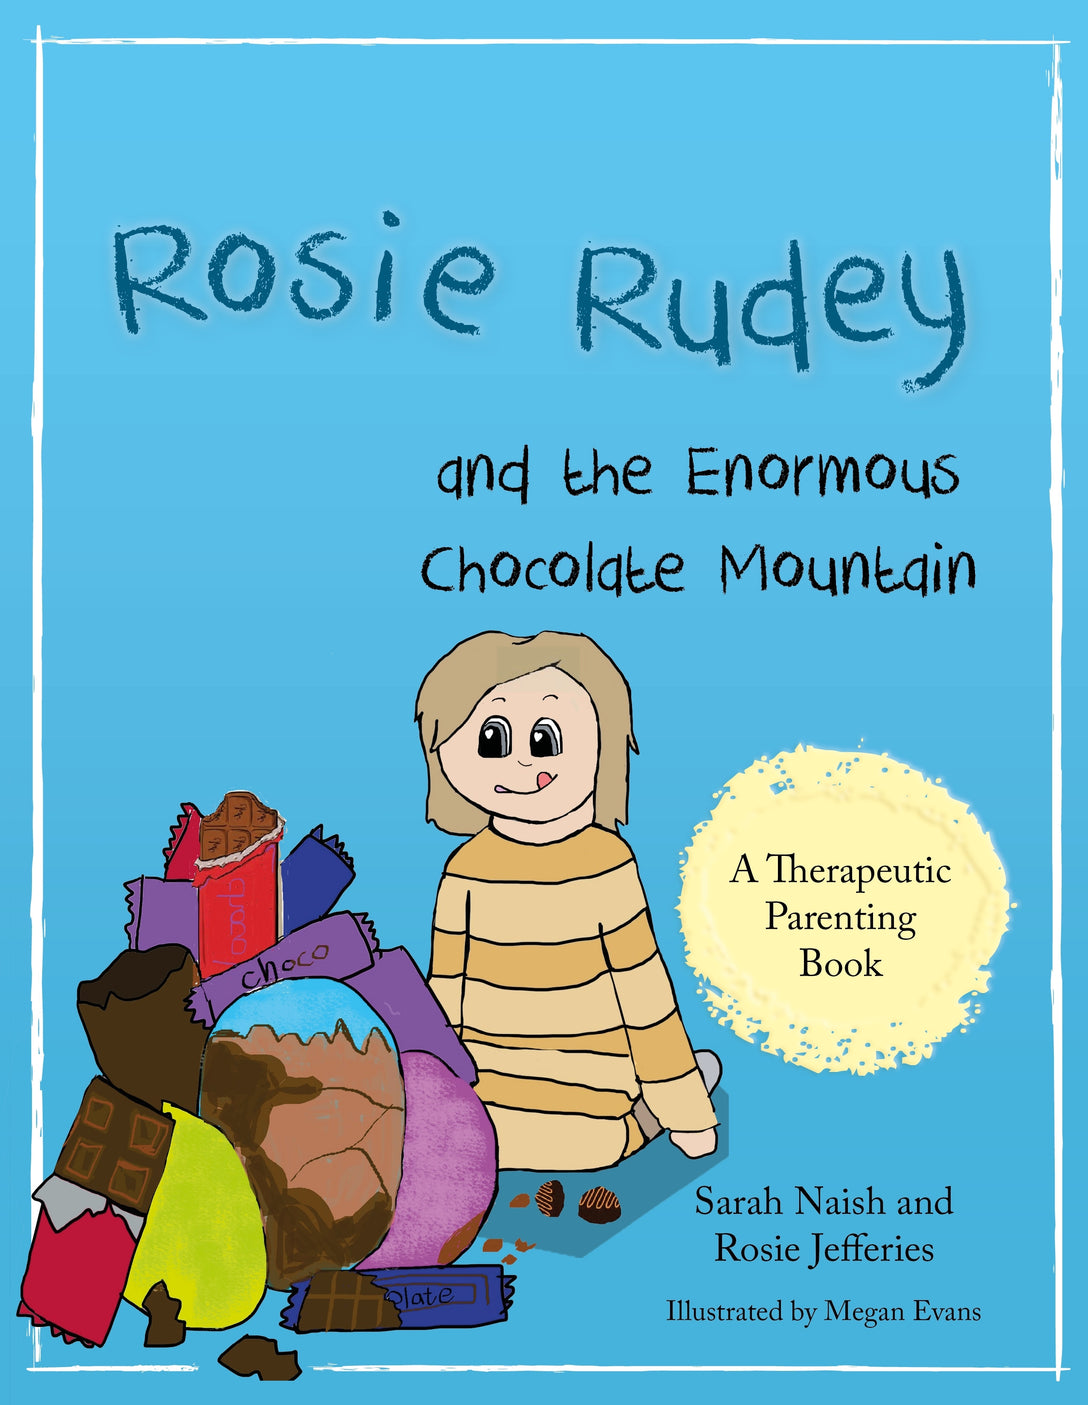 Rosie Rudey and the Enormous Chocolate Mountain by Sarah Naish, Rosie Jefferies, Megan Evans